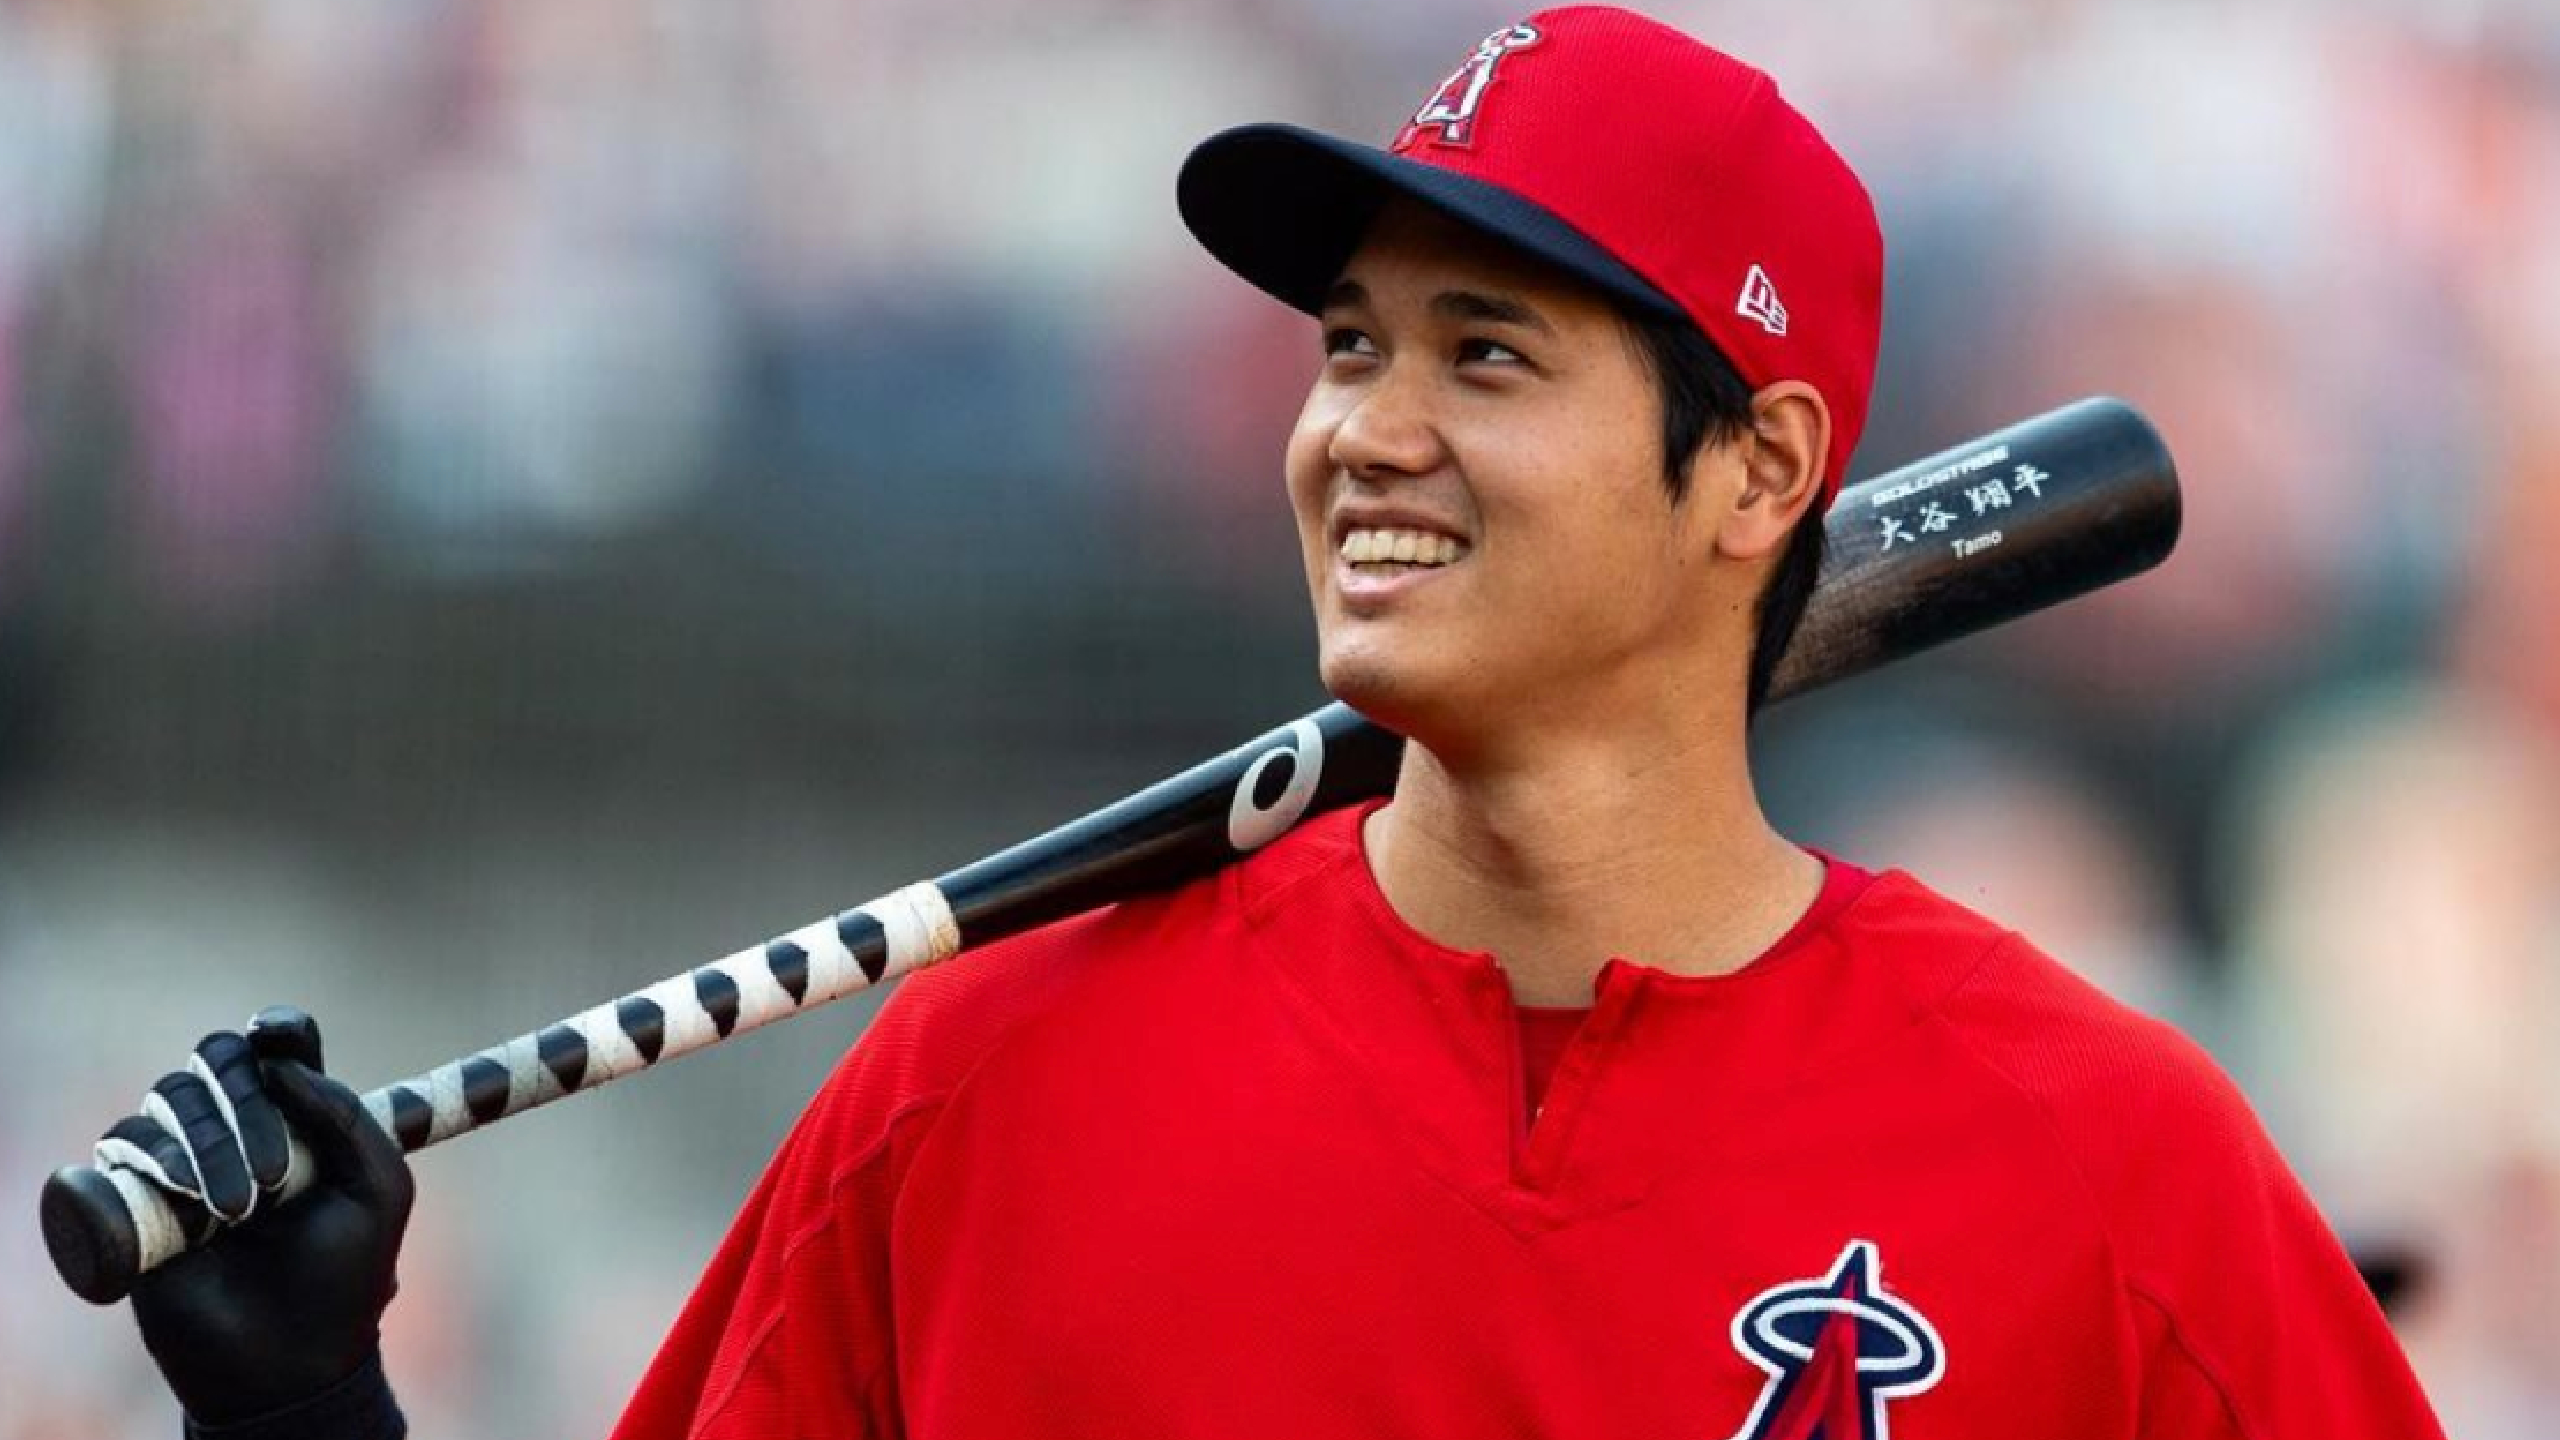 MLB: Shohei Ohtani is 'Made In Japan' with American adaptations